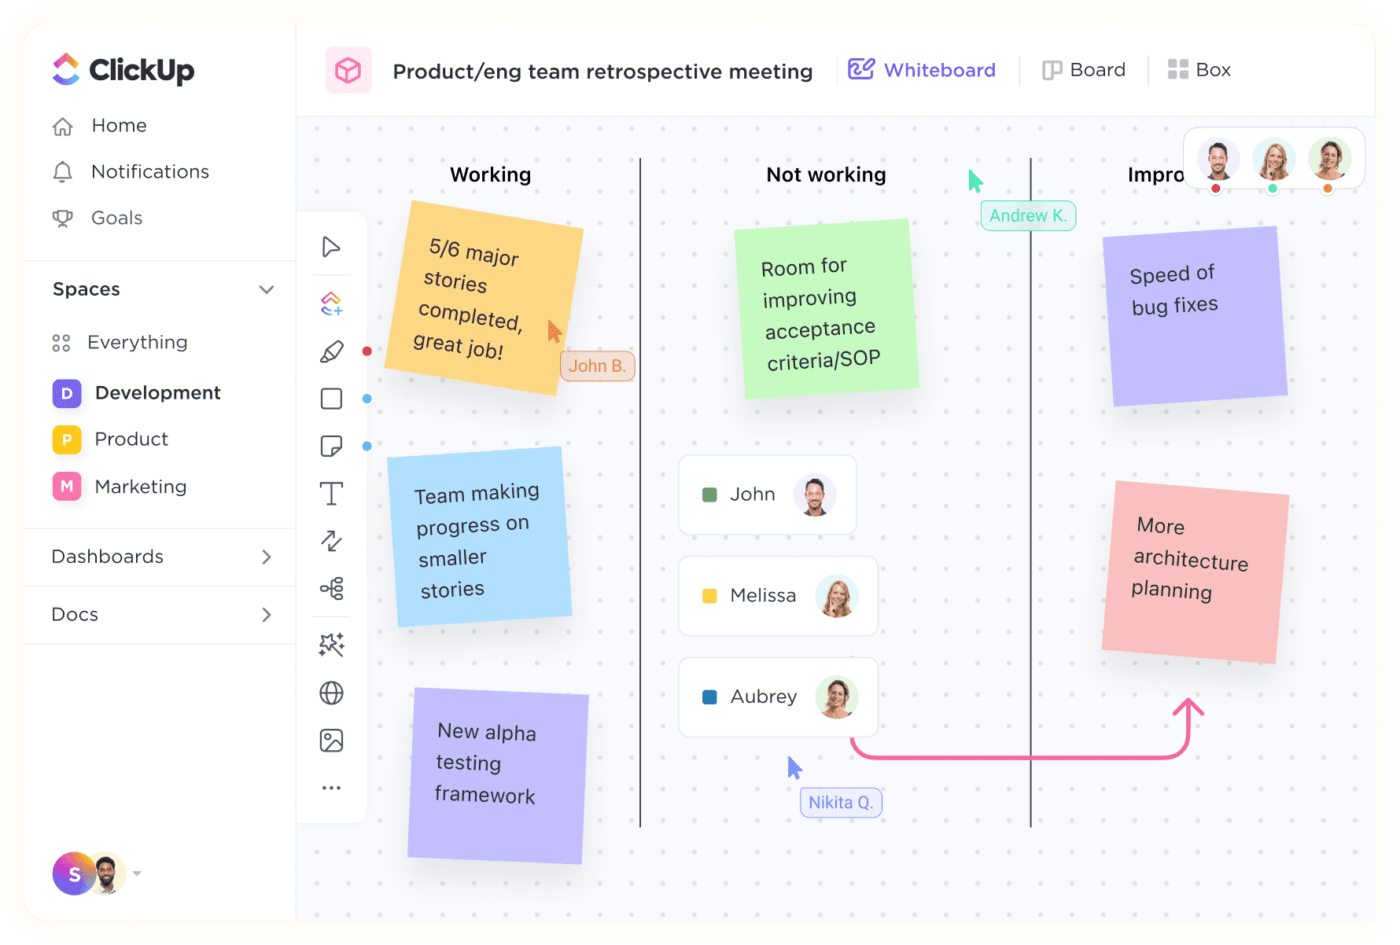 Brainstorm, plan, strategize, and streamline communication in real-time to ship projects faster with ClickUp Whiteboards